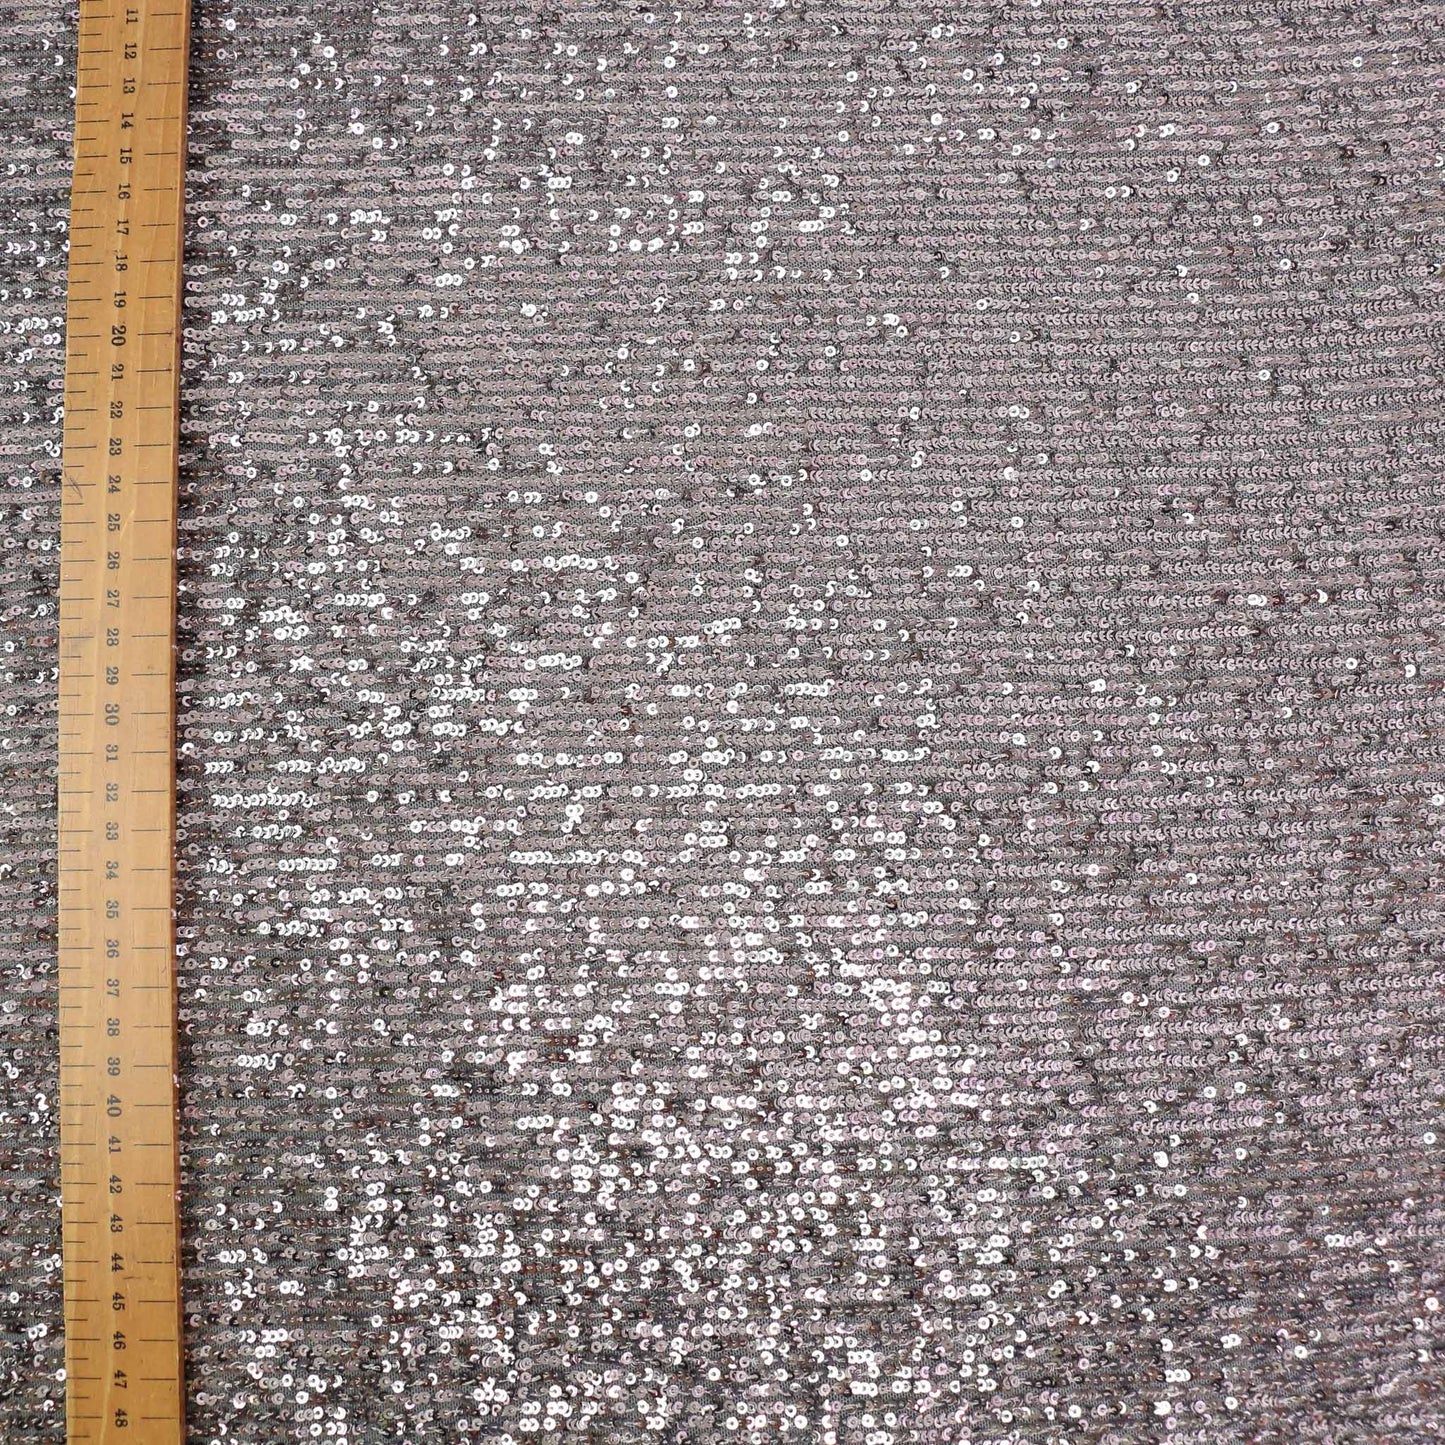 Stretchy Sequin Fabric - Silver